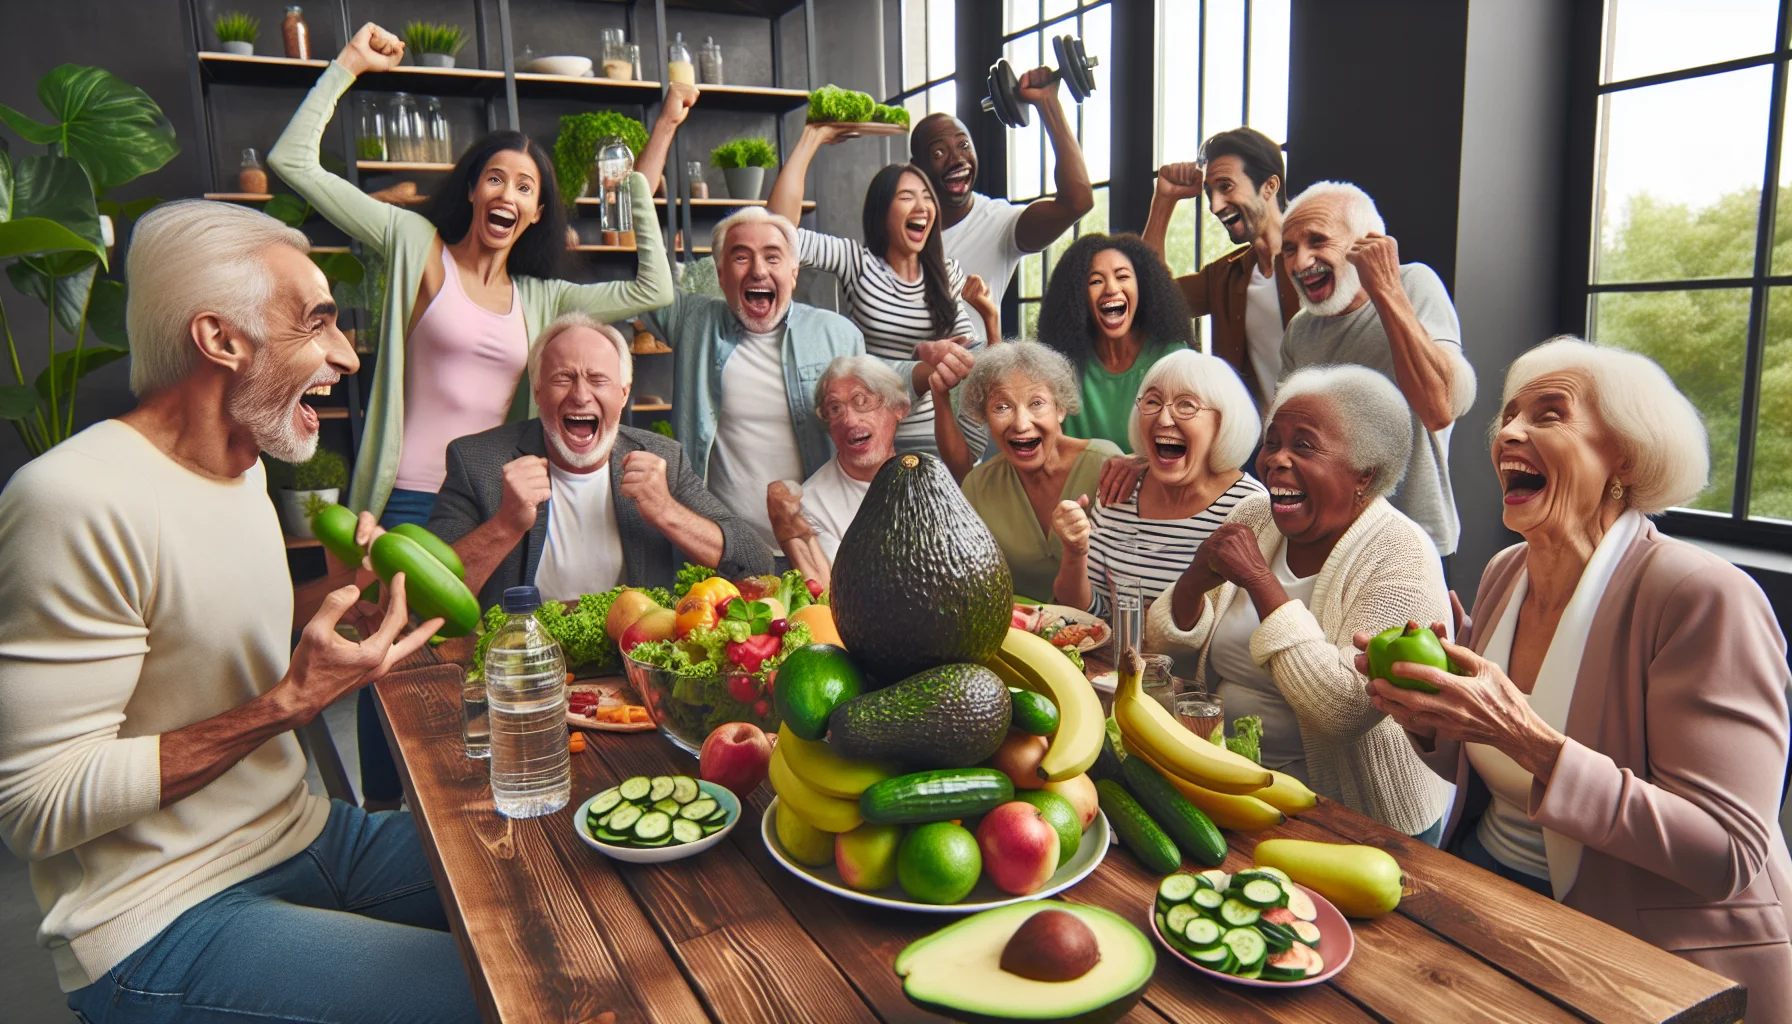 Imagine a humorous scene at a friendly social gathering for senior citizens. They're sitting around a large wooden table piled high with mouth-watering, vitamin-rich foods known for improving skin elasticity. You see a jovial Black woman, exclaiming delight over a giant avocado half, and a playful South Asian man comically pretending to lift weights with cucumbers. A laughter-filled Caucasian woman is mock-threatened with a bunch of bananas by a cheerful Middle-Eastern man, while a group of friends of various descents watch on in amused astonishment, all having a great time. Healthy fruits, greens, and water are plenty on the table.